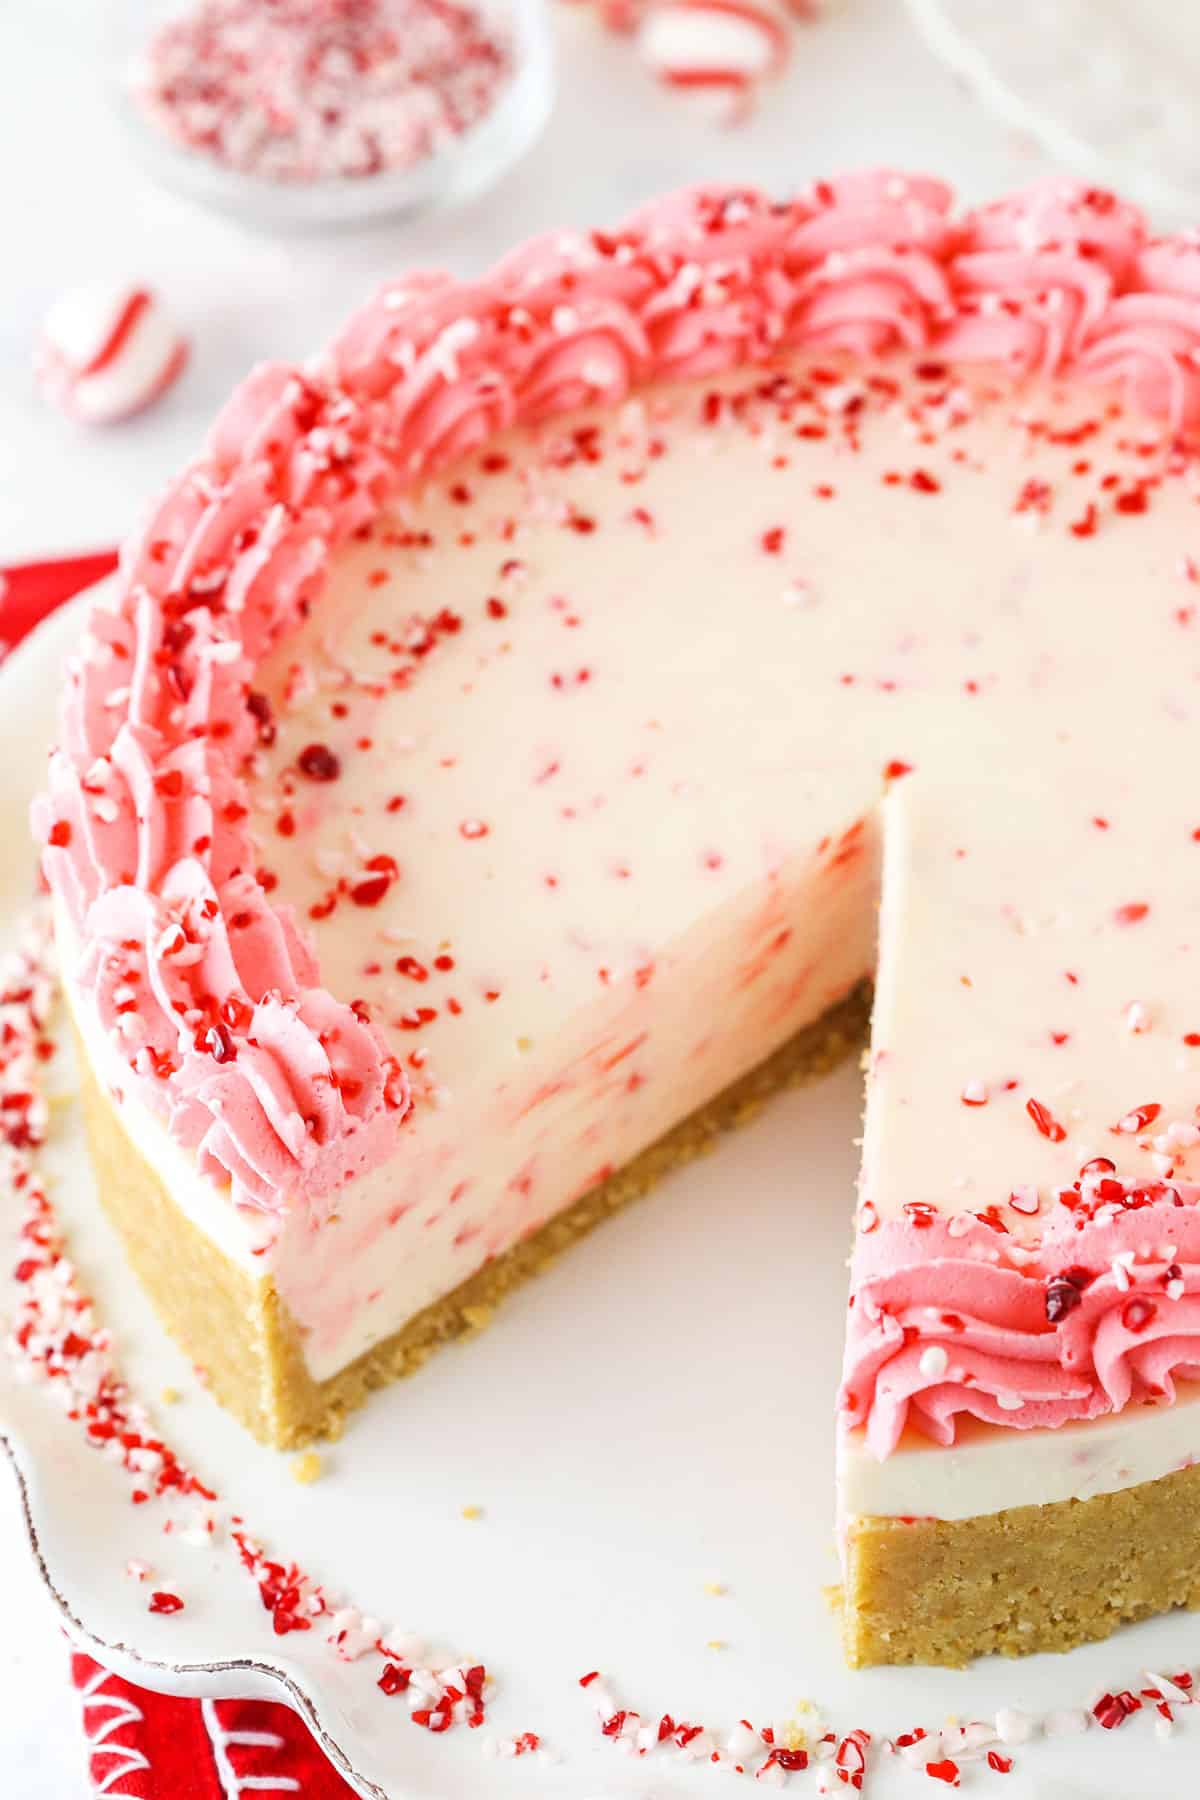 A Peppermint Cheesecake on a Plate with One Slice Missing.